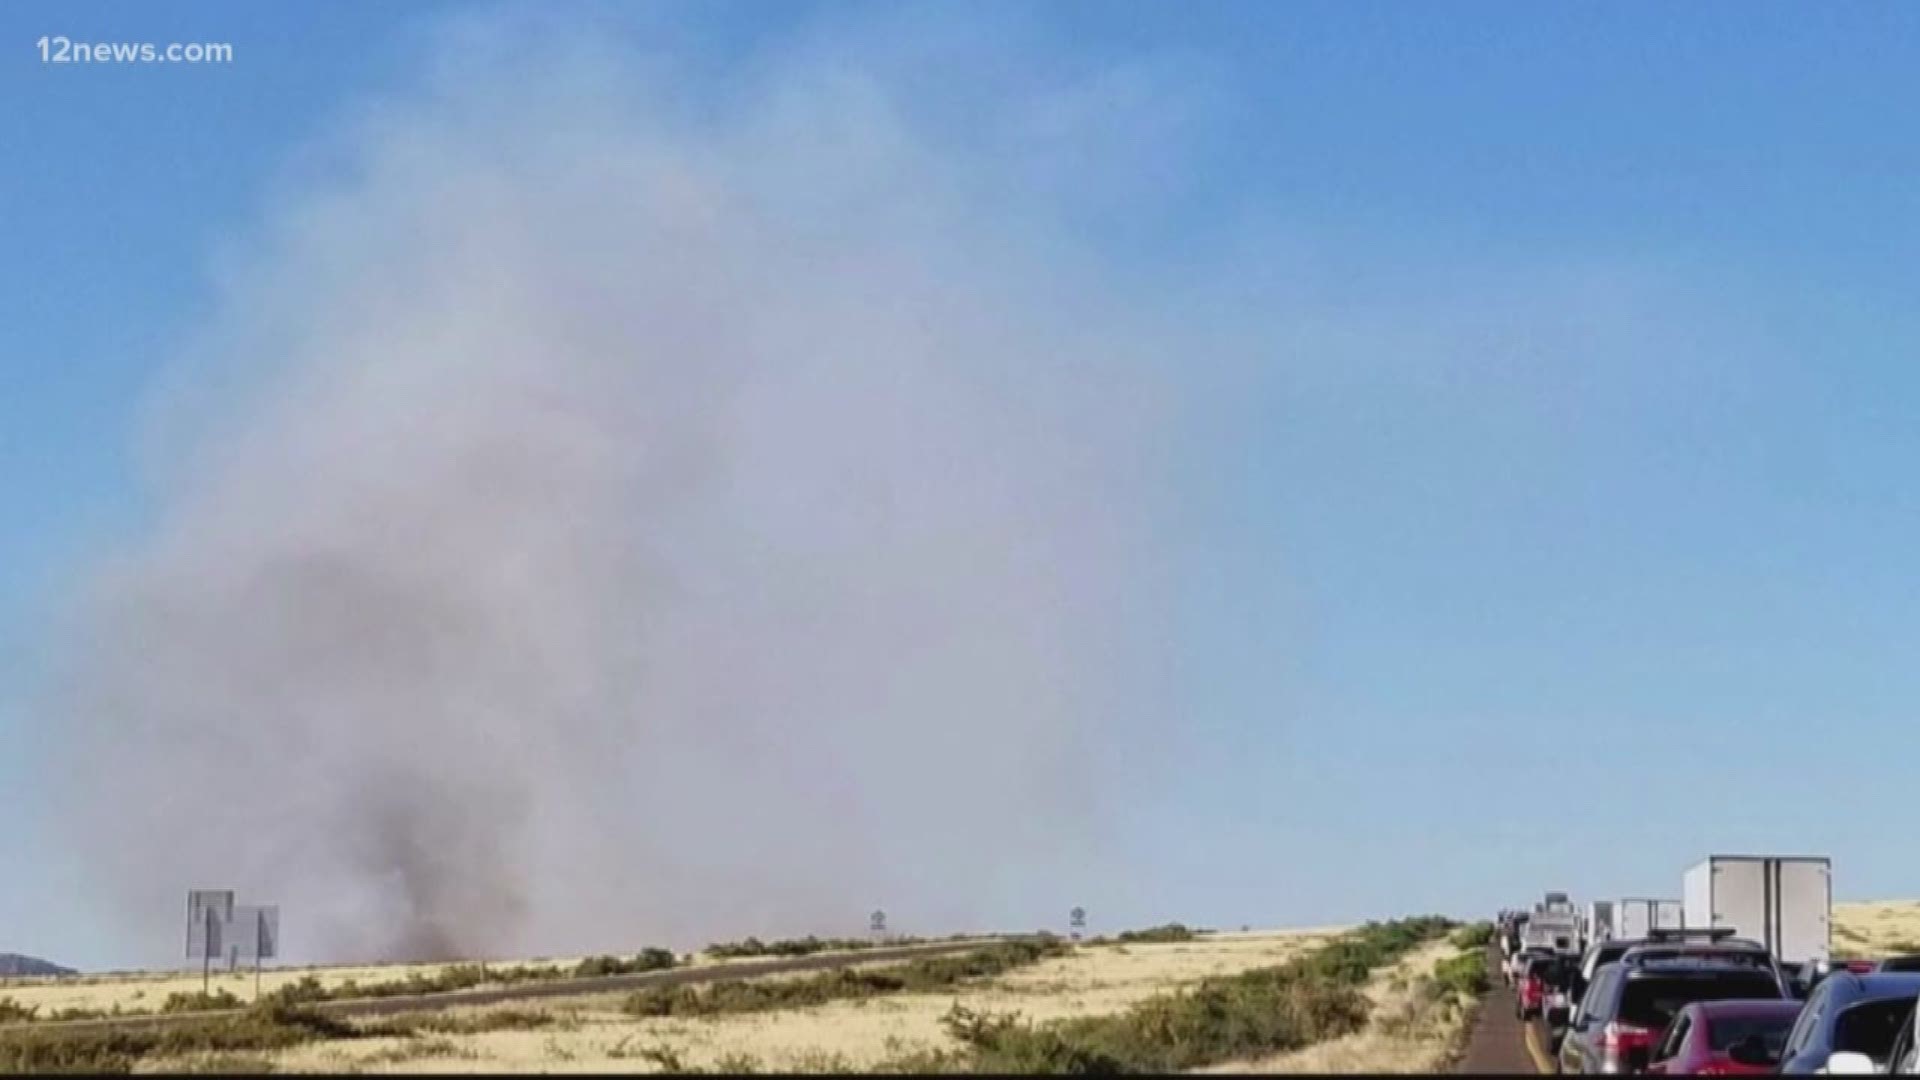 Even though the Interstate 17 has reopened north of Phoenix, crews are still working to fight the Badger Springs Fire.